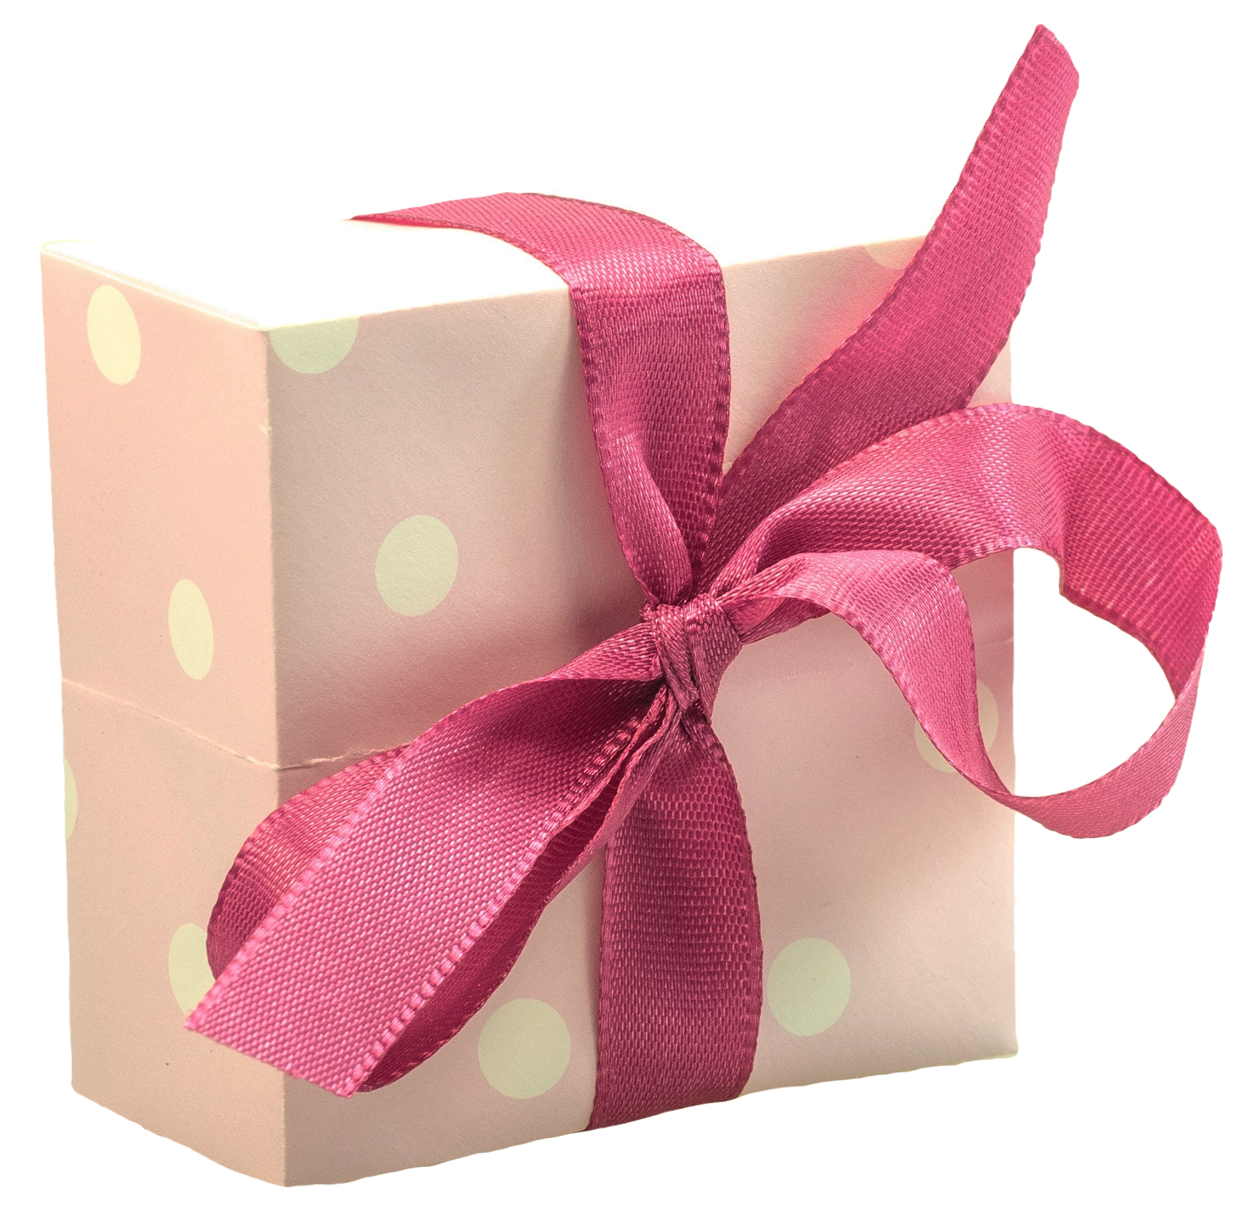 Tiny Gift Box with Big Bow PNG Image